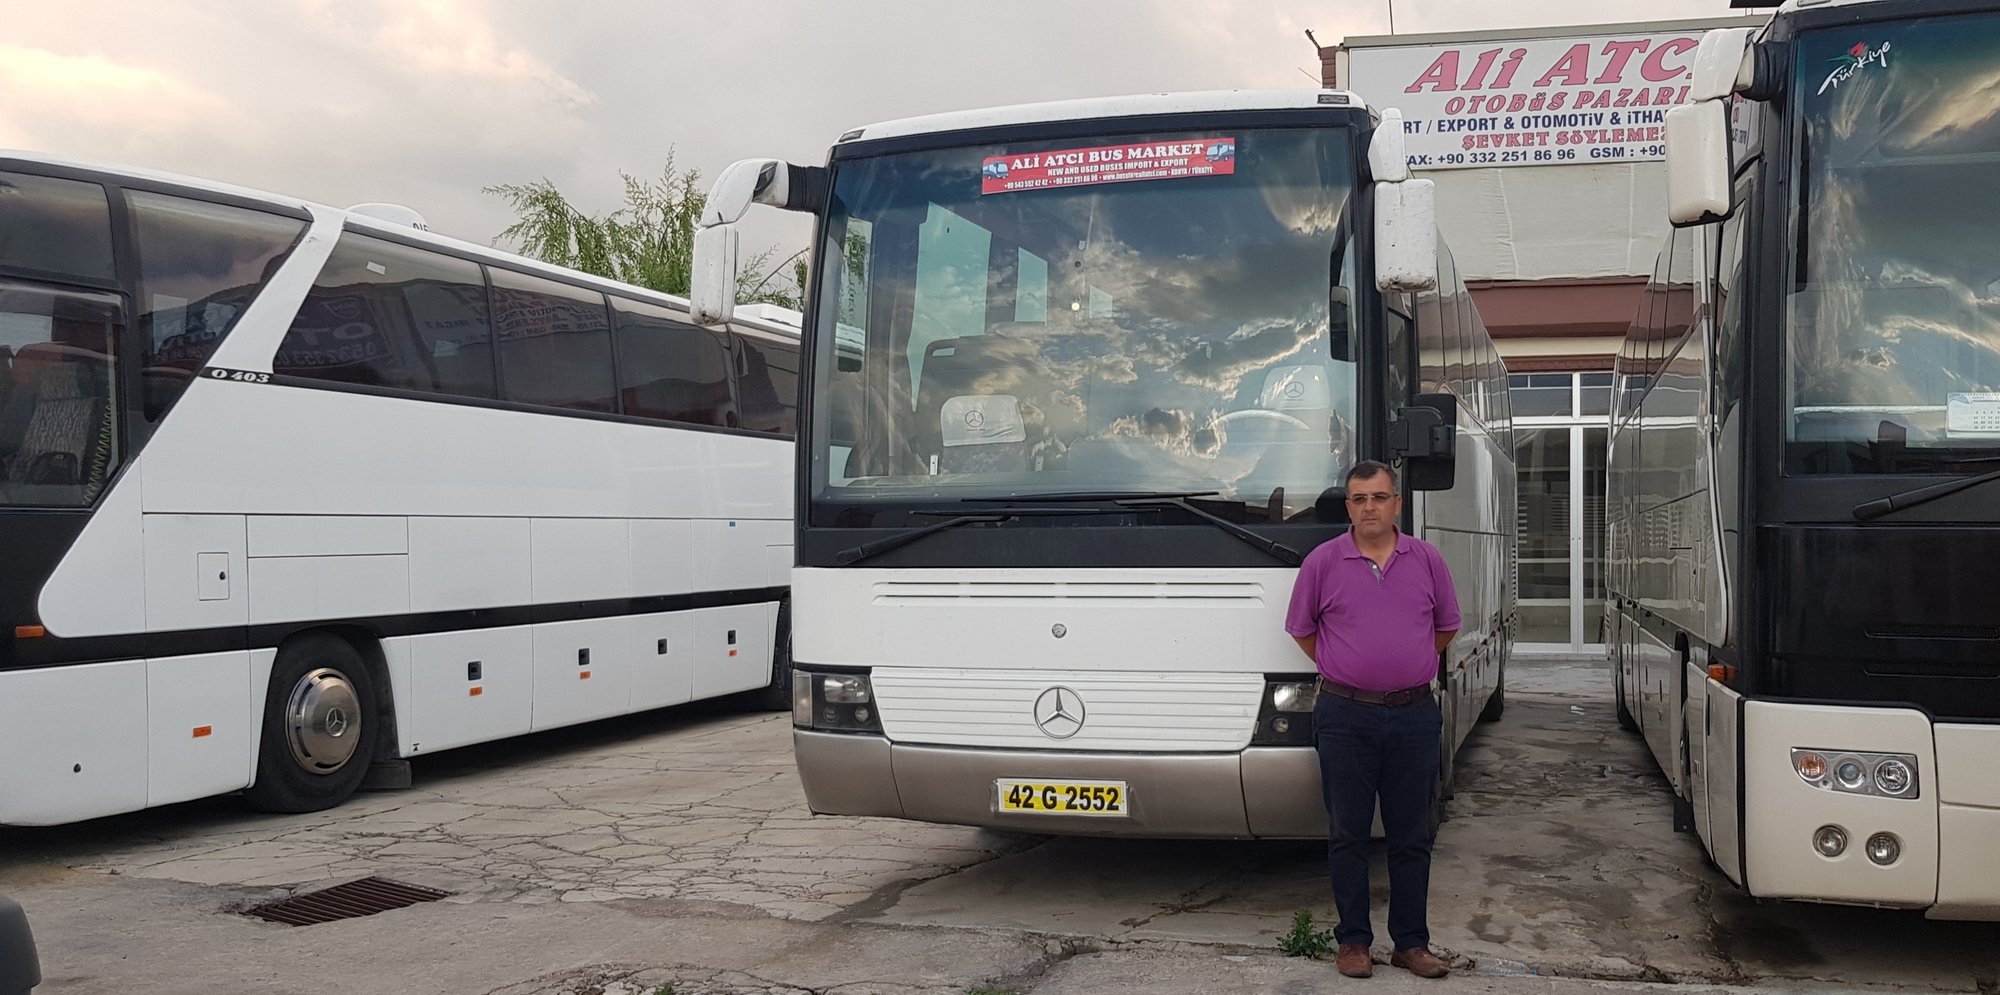 ALİ ATCI BUSSTORE undefined: photos 5